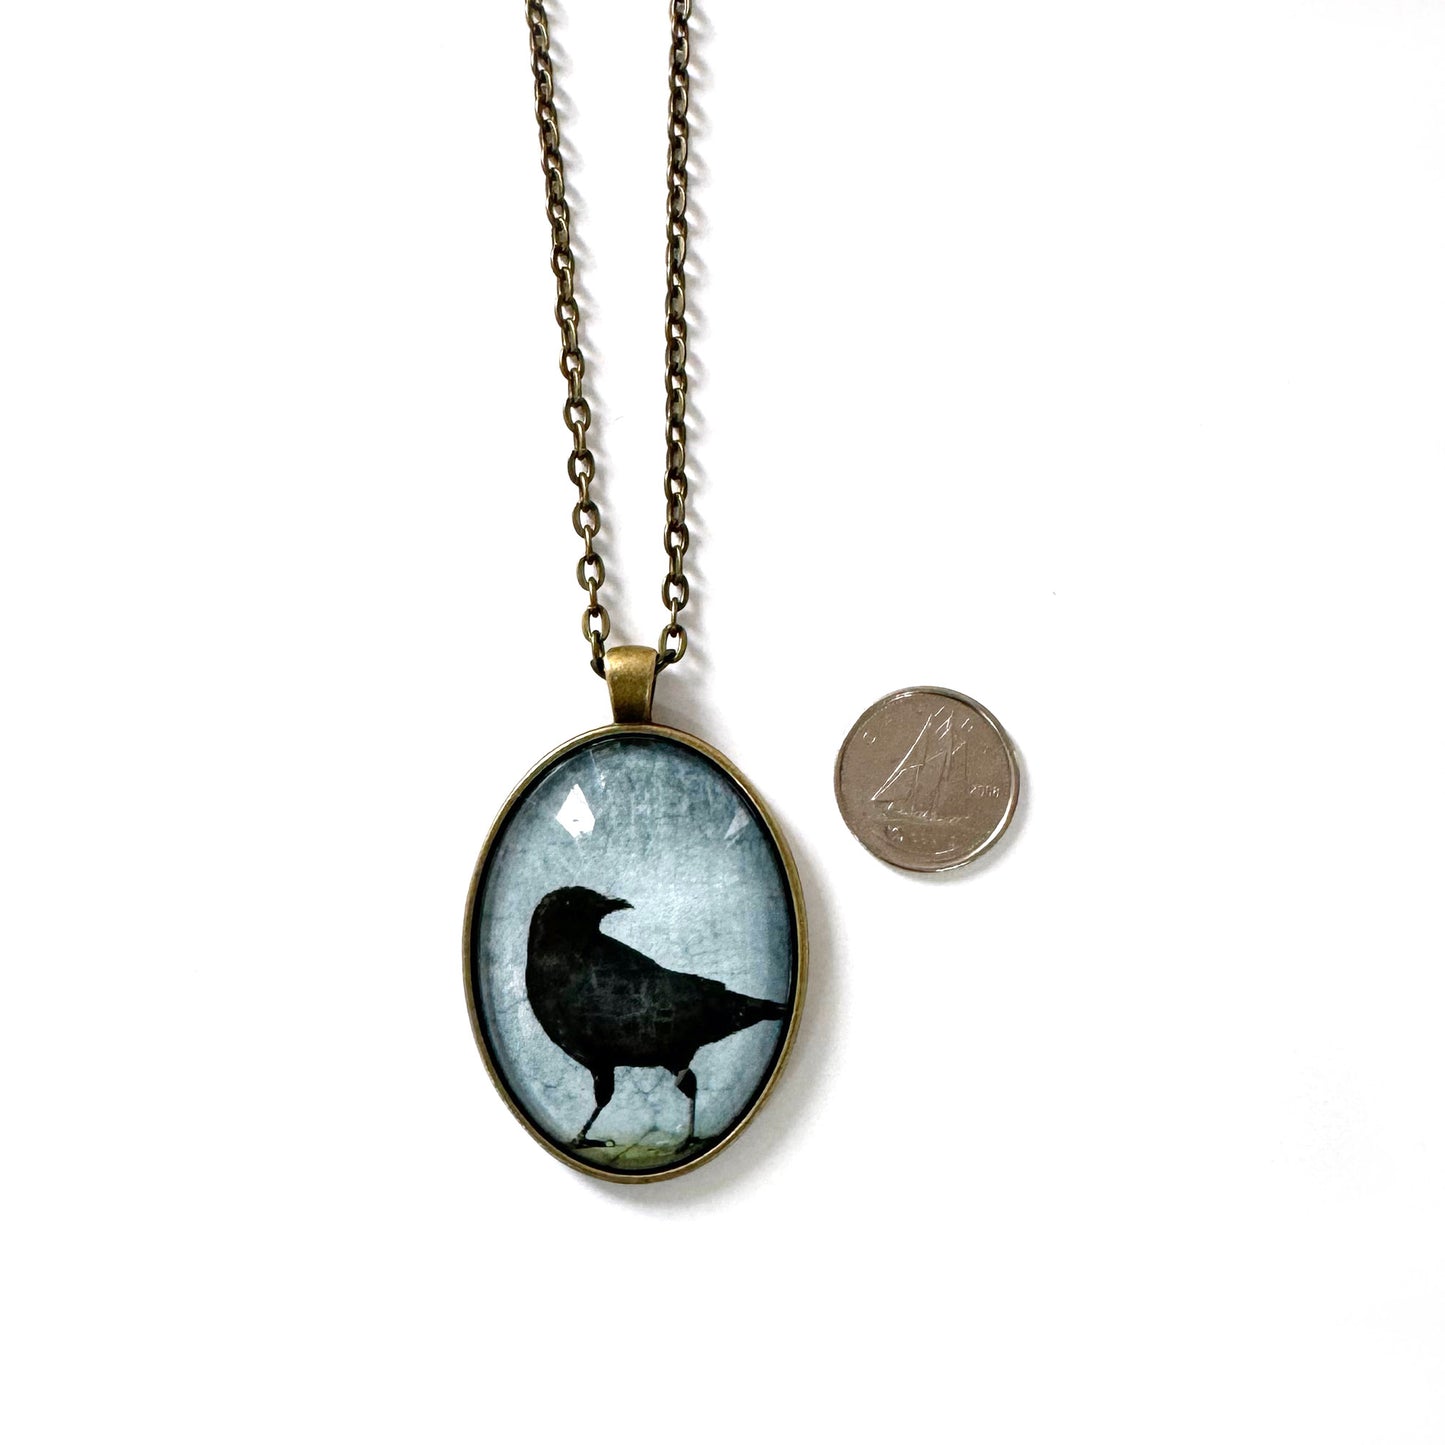 LOOKING BACK CROW - Large Glass Pendant